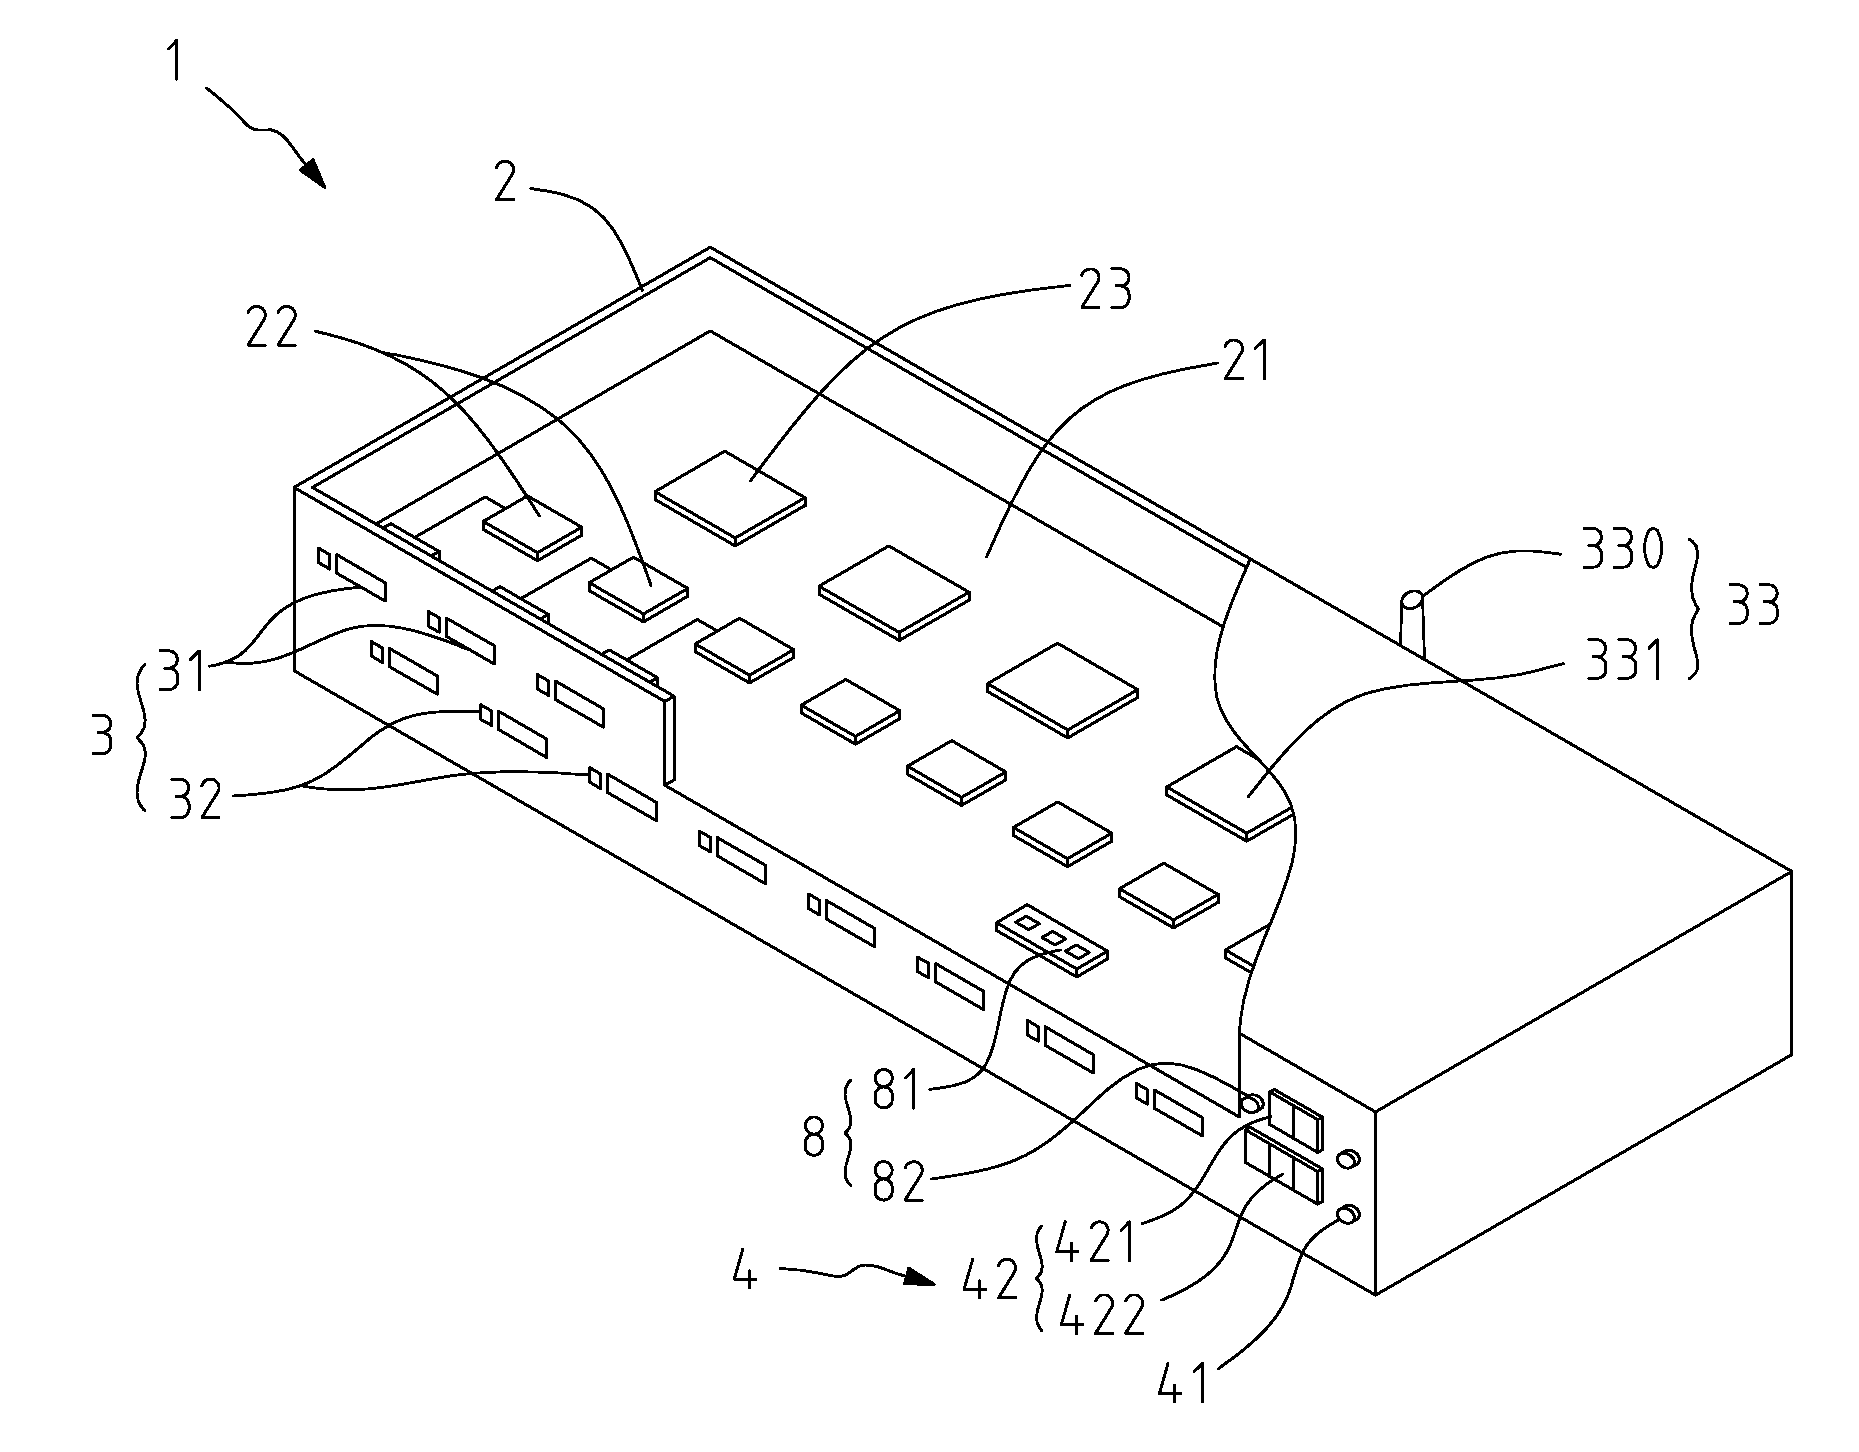 Remotely monitorable multi-port charging device